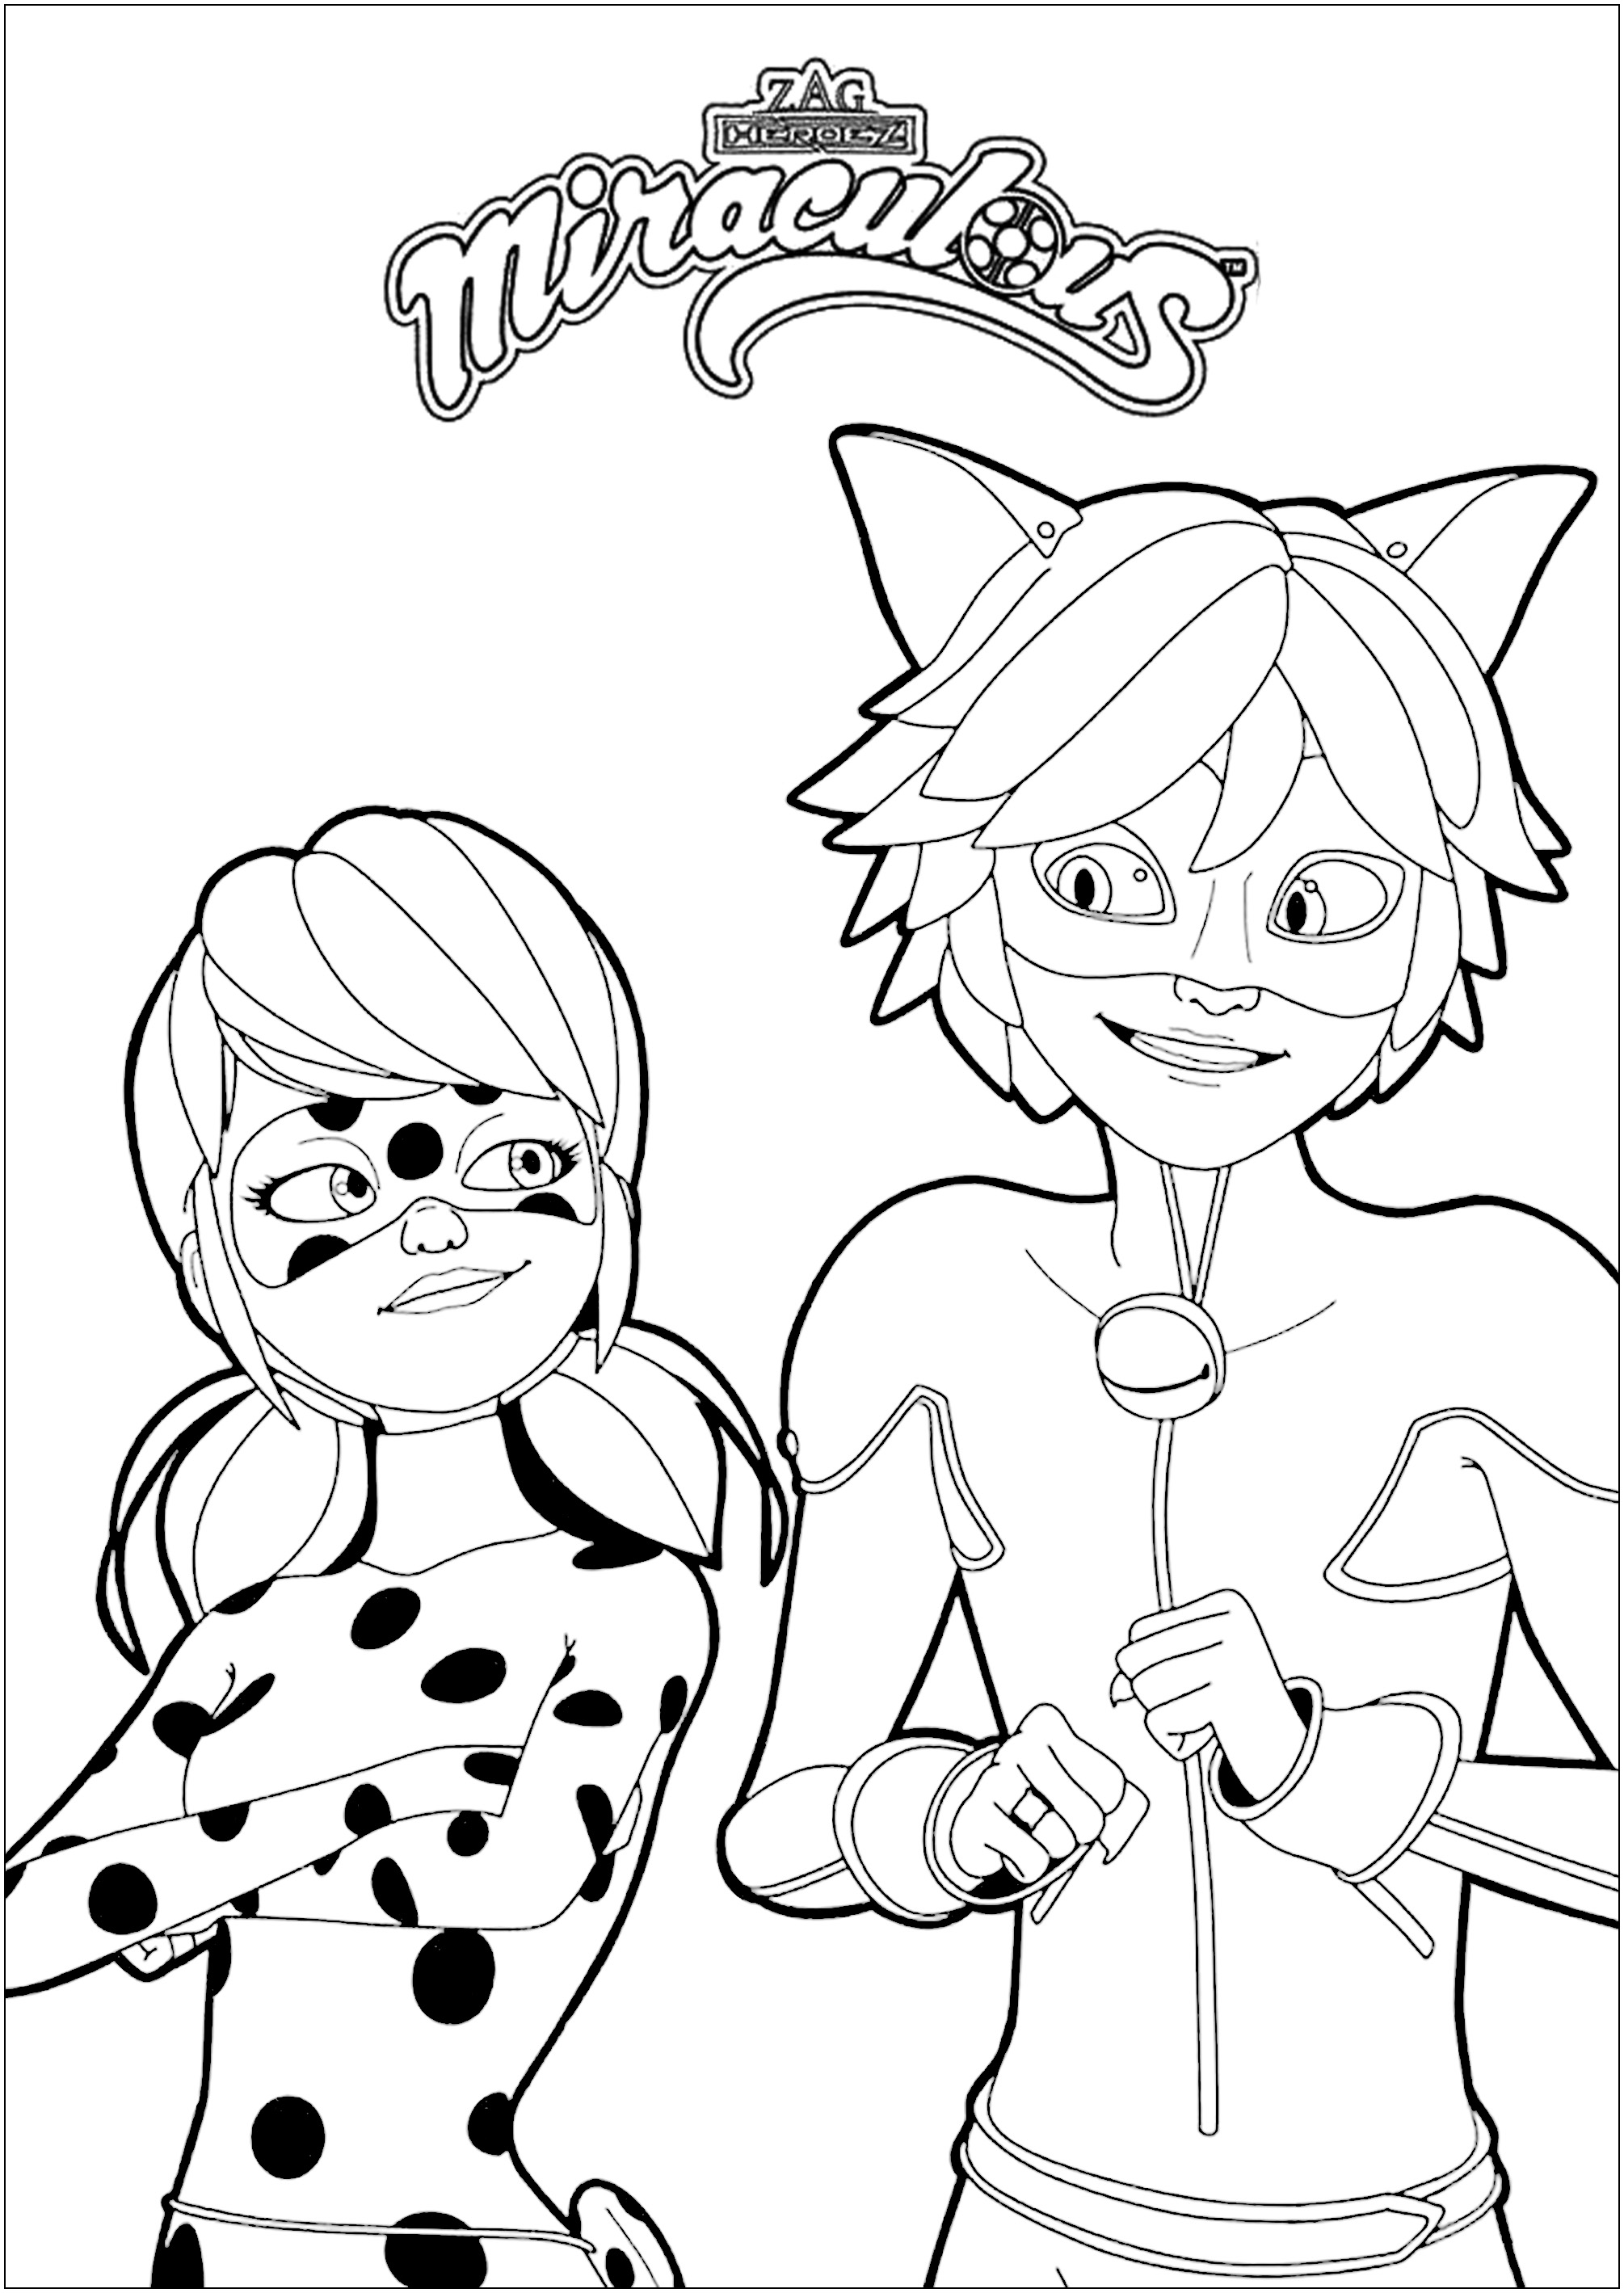 Marinette and Adrien, with the Miraculous logo